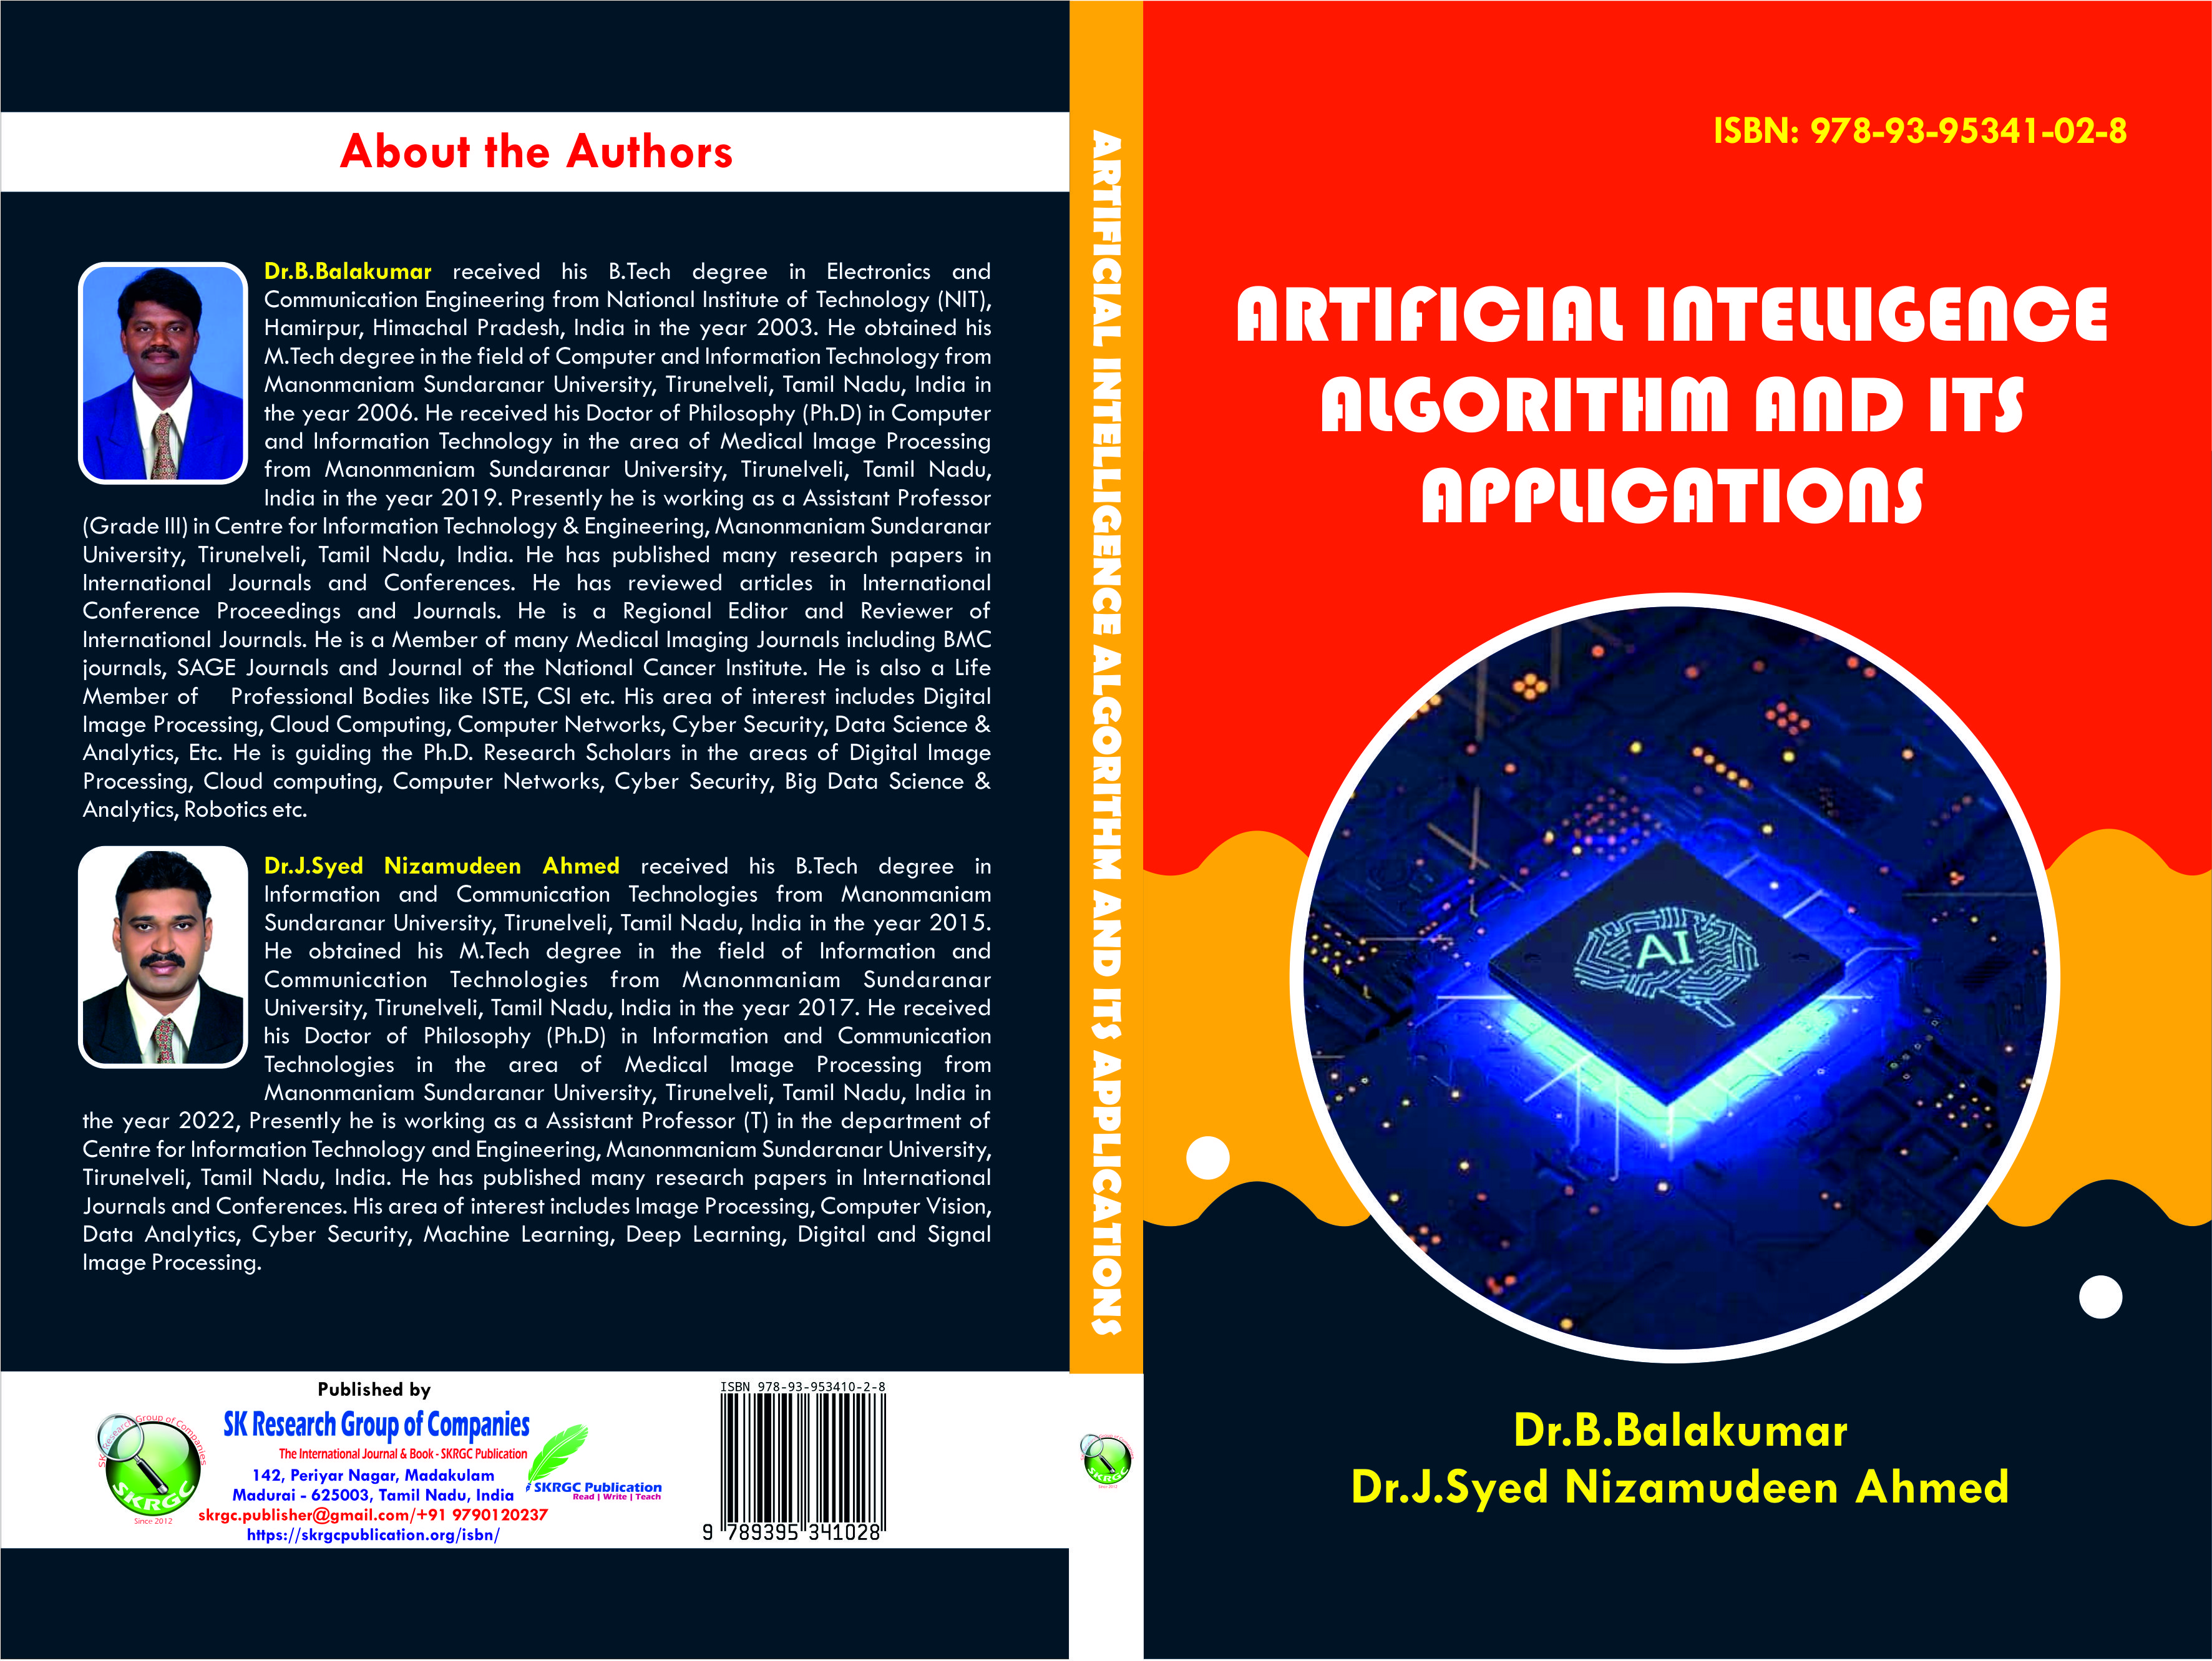 Artifical Intelligence Algorithm and its Applications